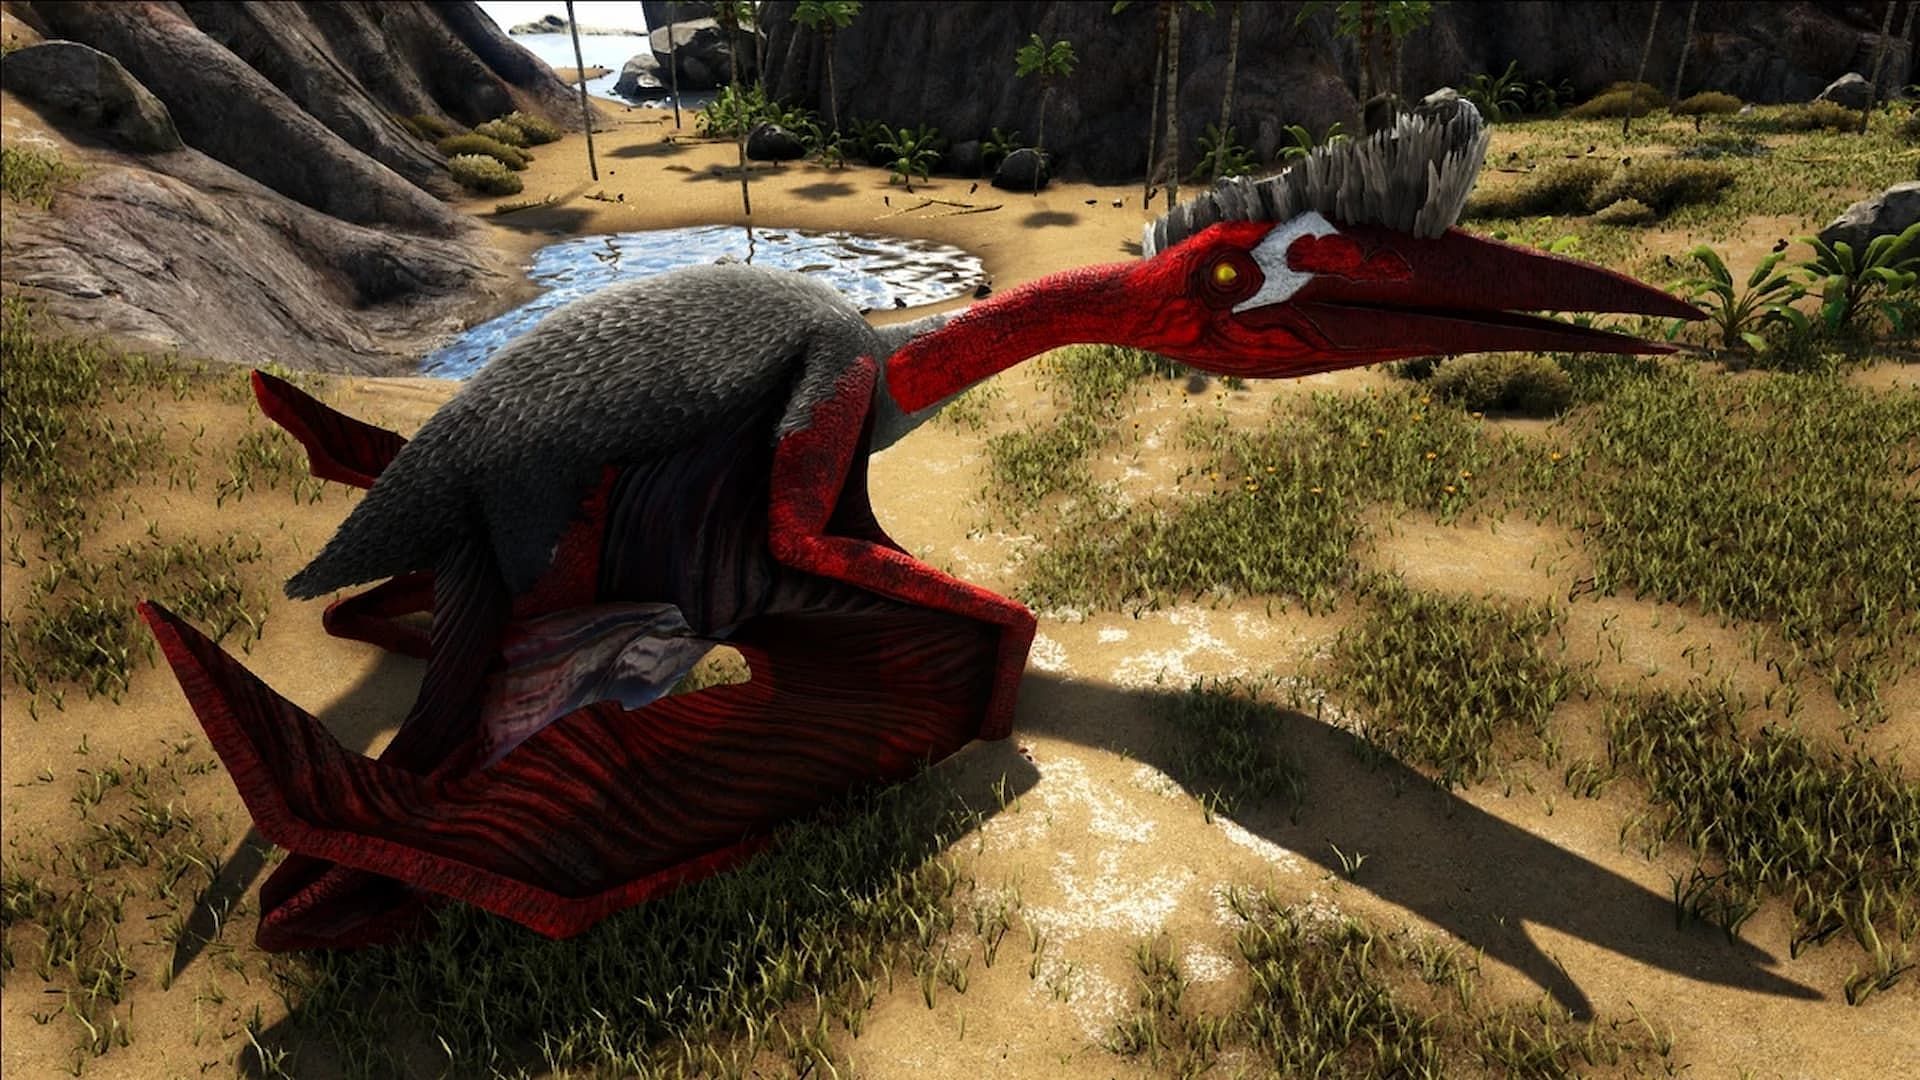 A Quetzal in Ark Survival Ascended